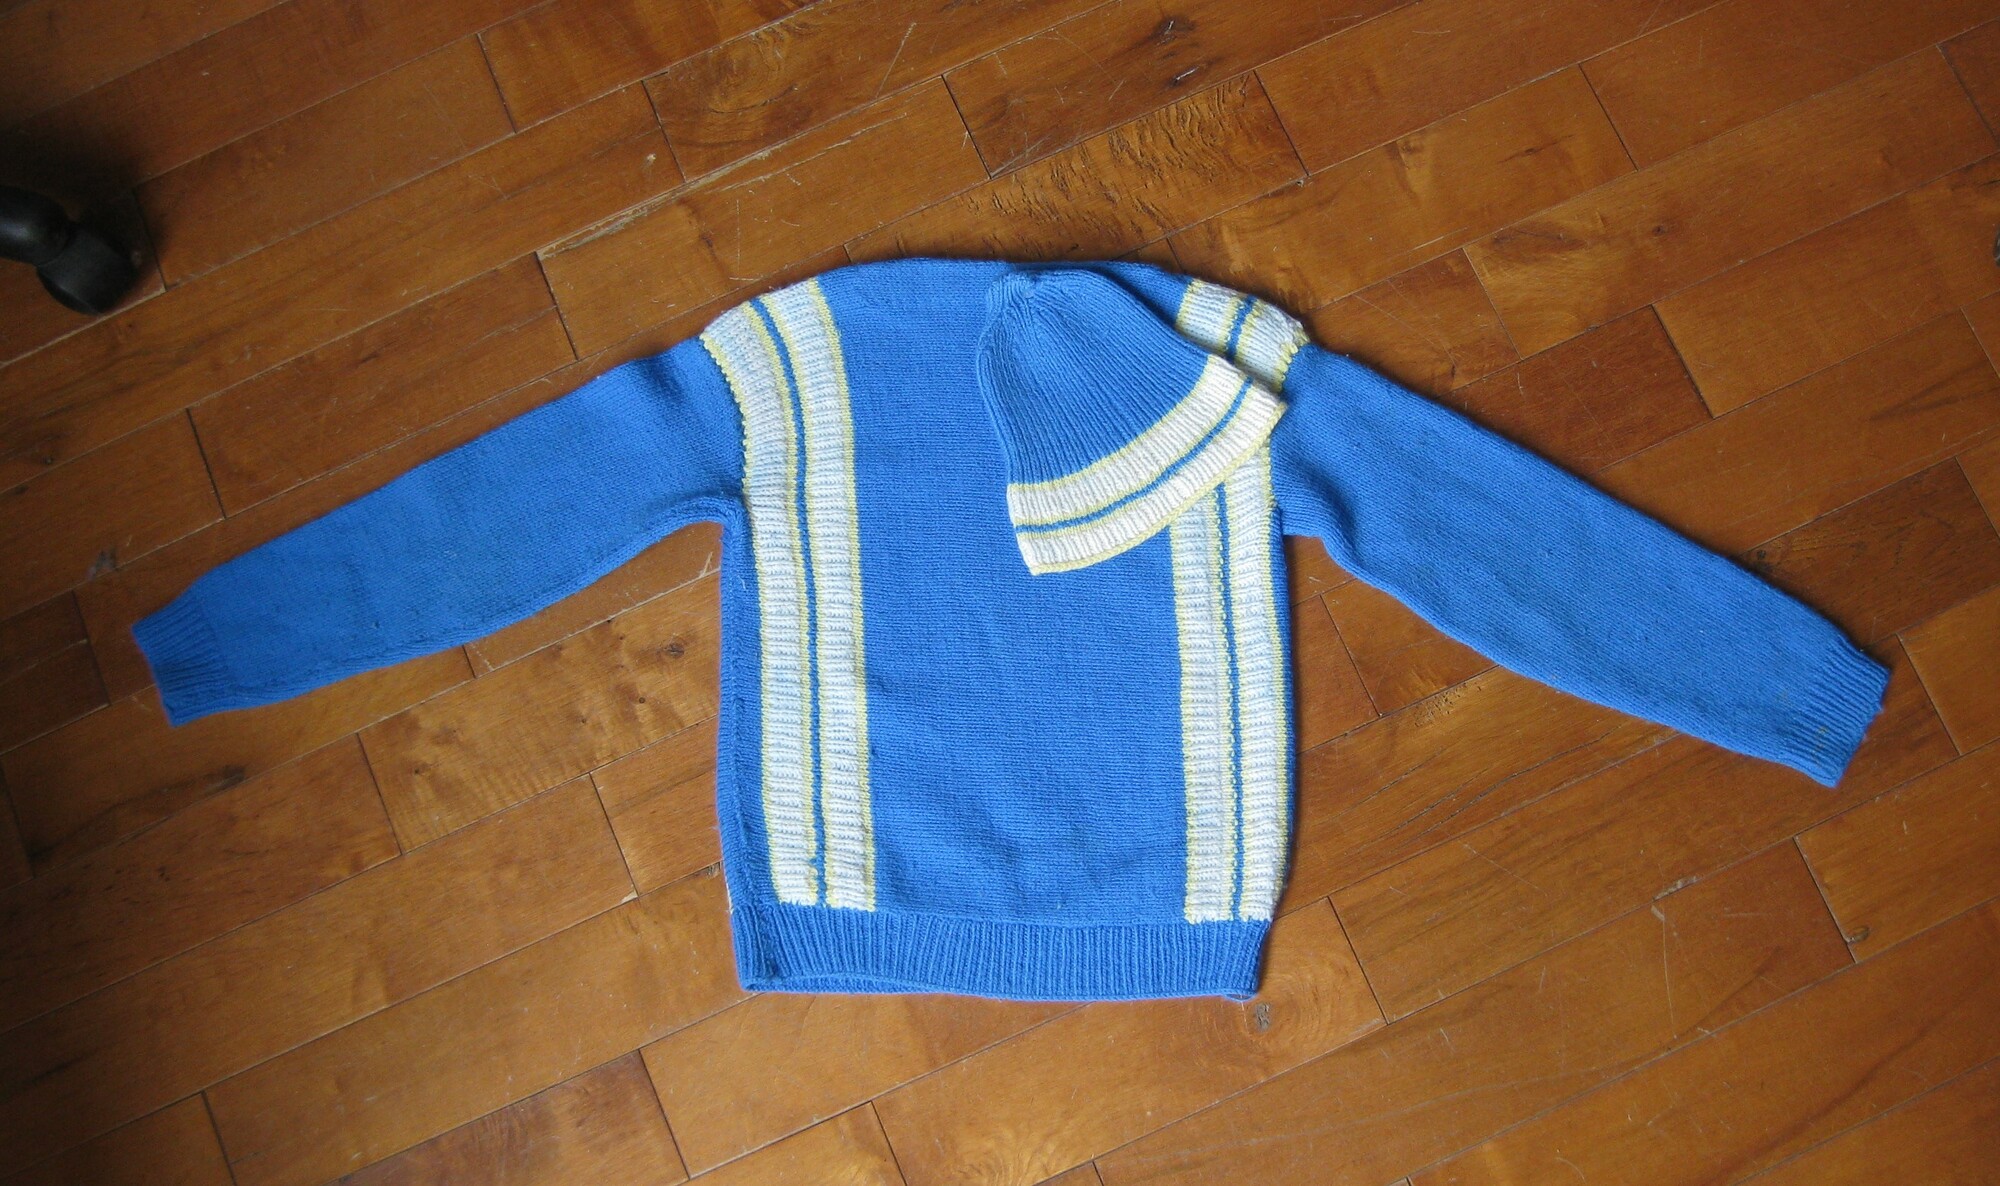 THis is a little boys' sweater and cap set from the 1960s.
It belonged to a friend of mine and was given to me by his mother as she is doing some clearing out.
Very sweet blue color with white and yellow stripes

No labels, feels like wool acrylic blend

I couldn't find any modern boys sizing charts to help give this a size... they all want to know how tall your boy is and what age...
This will fit a child who measures 24in around at the chest
The sweater is 17.5in in length
Excellent condition with a tiny smidge of paint at the end of the right sleeve.

thanks for looking!
#16078